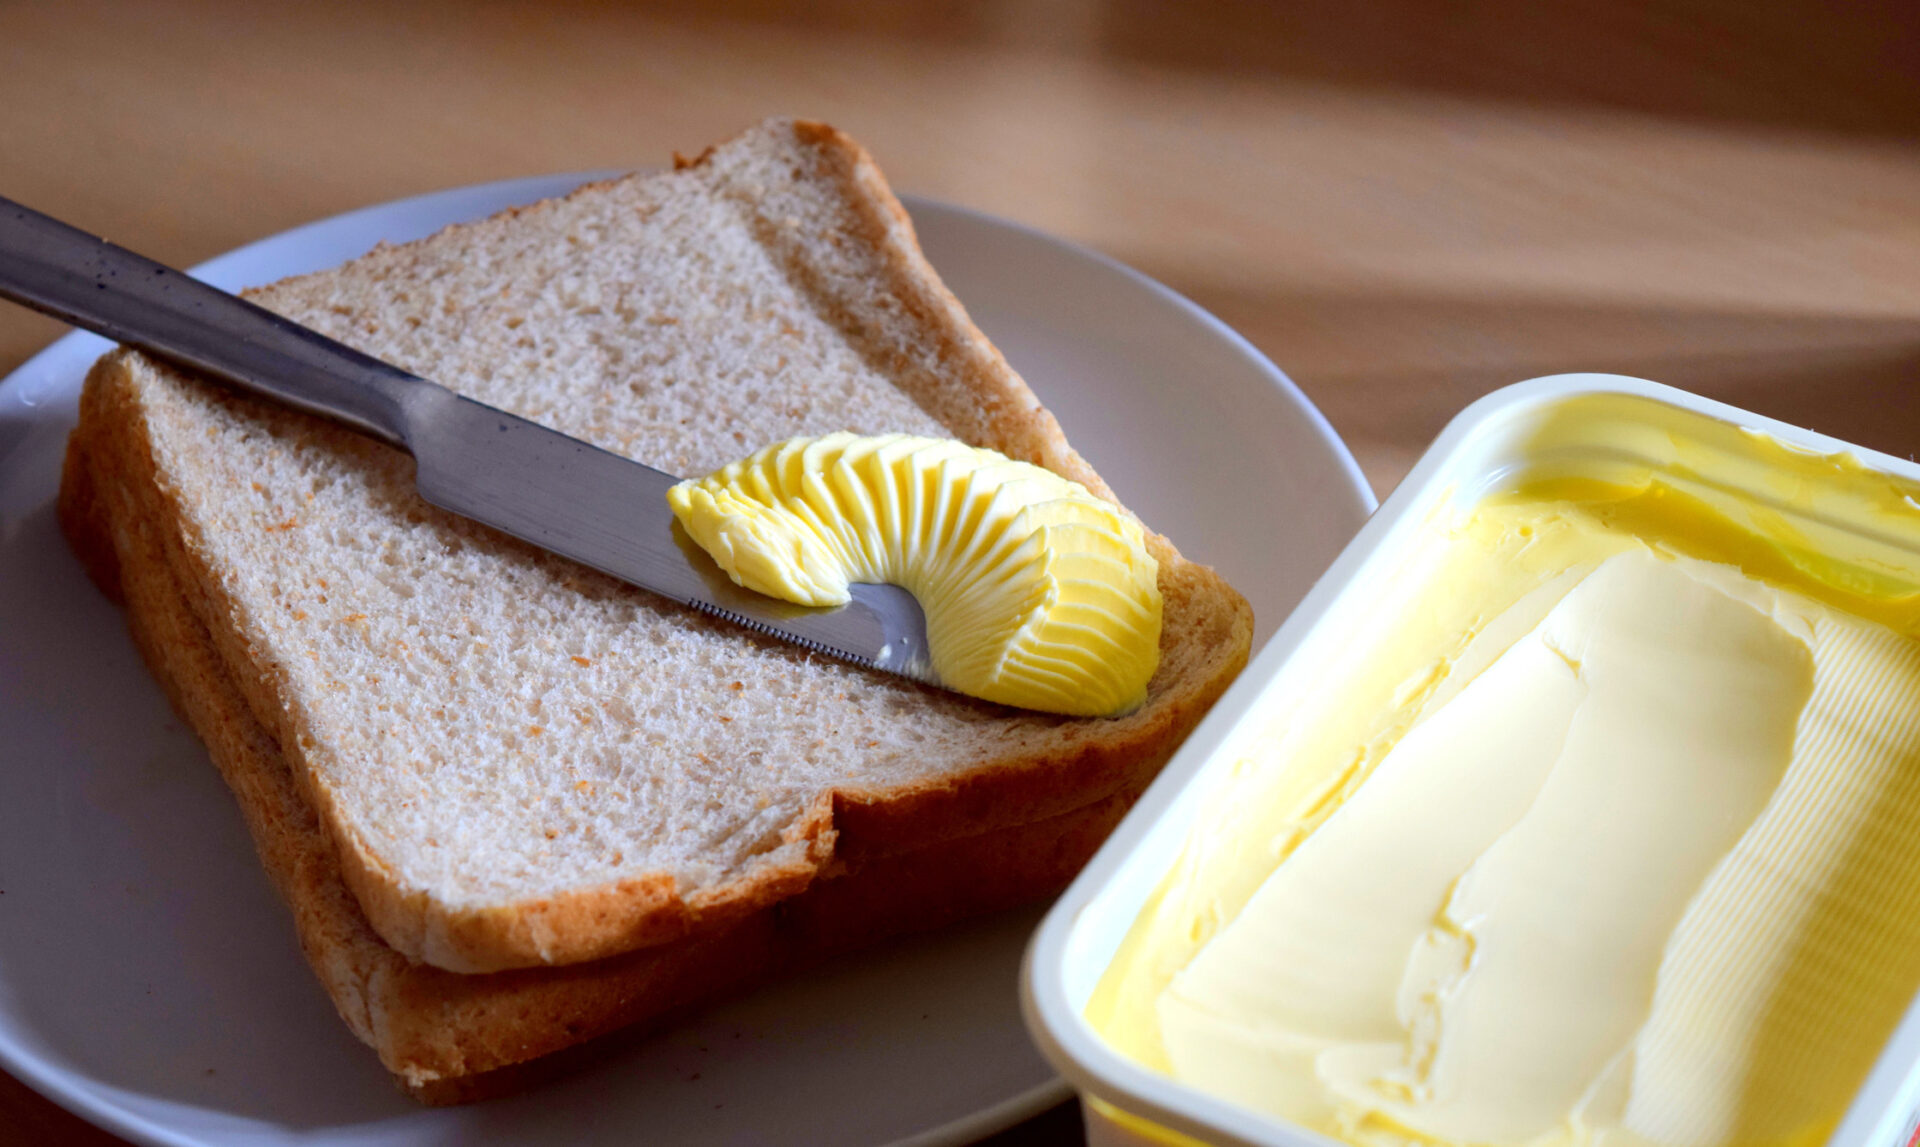 Global Margarine and Shortening Market Is Estimated To Witness High Growth Owing To Increasing Consumer Demand and Technological Advancements